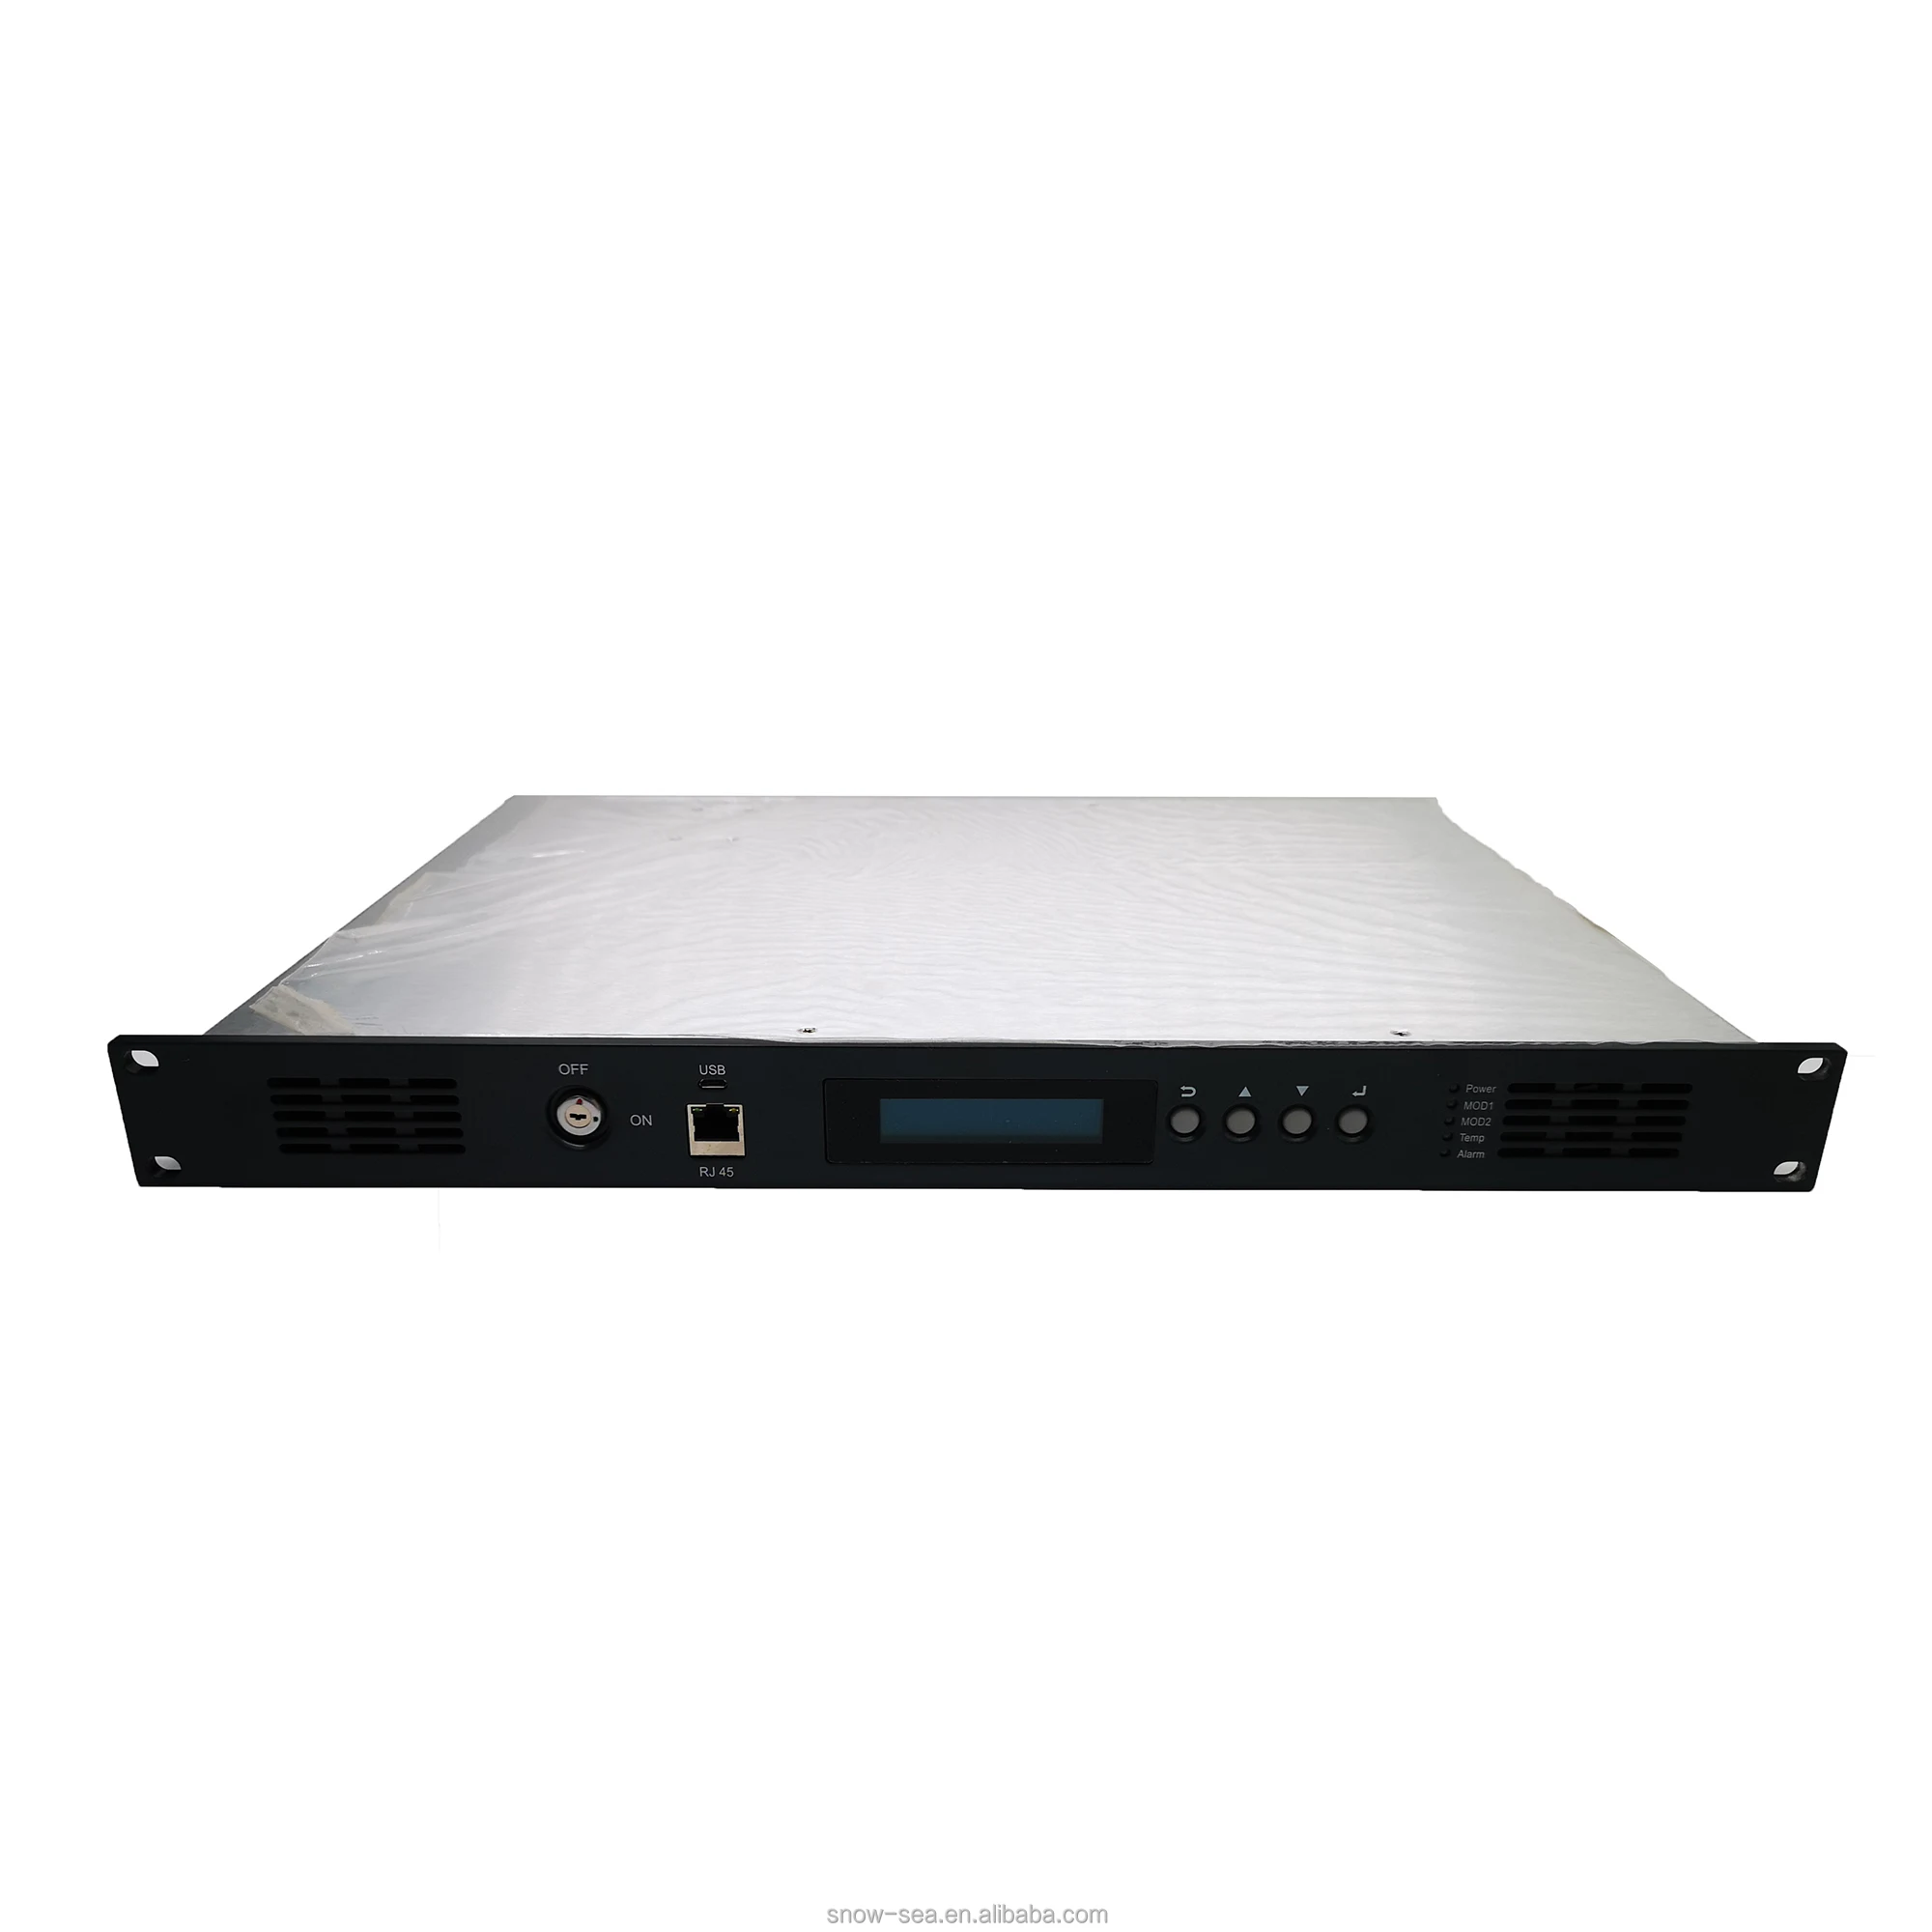 

1550nm 8x19dBm Gain Output CATV EDFA Optical Amplifier with WDM and AGC and Dual Power Supply and Simple Network Management Func